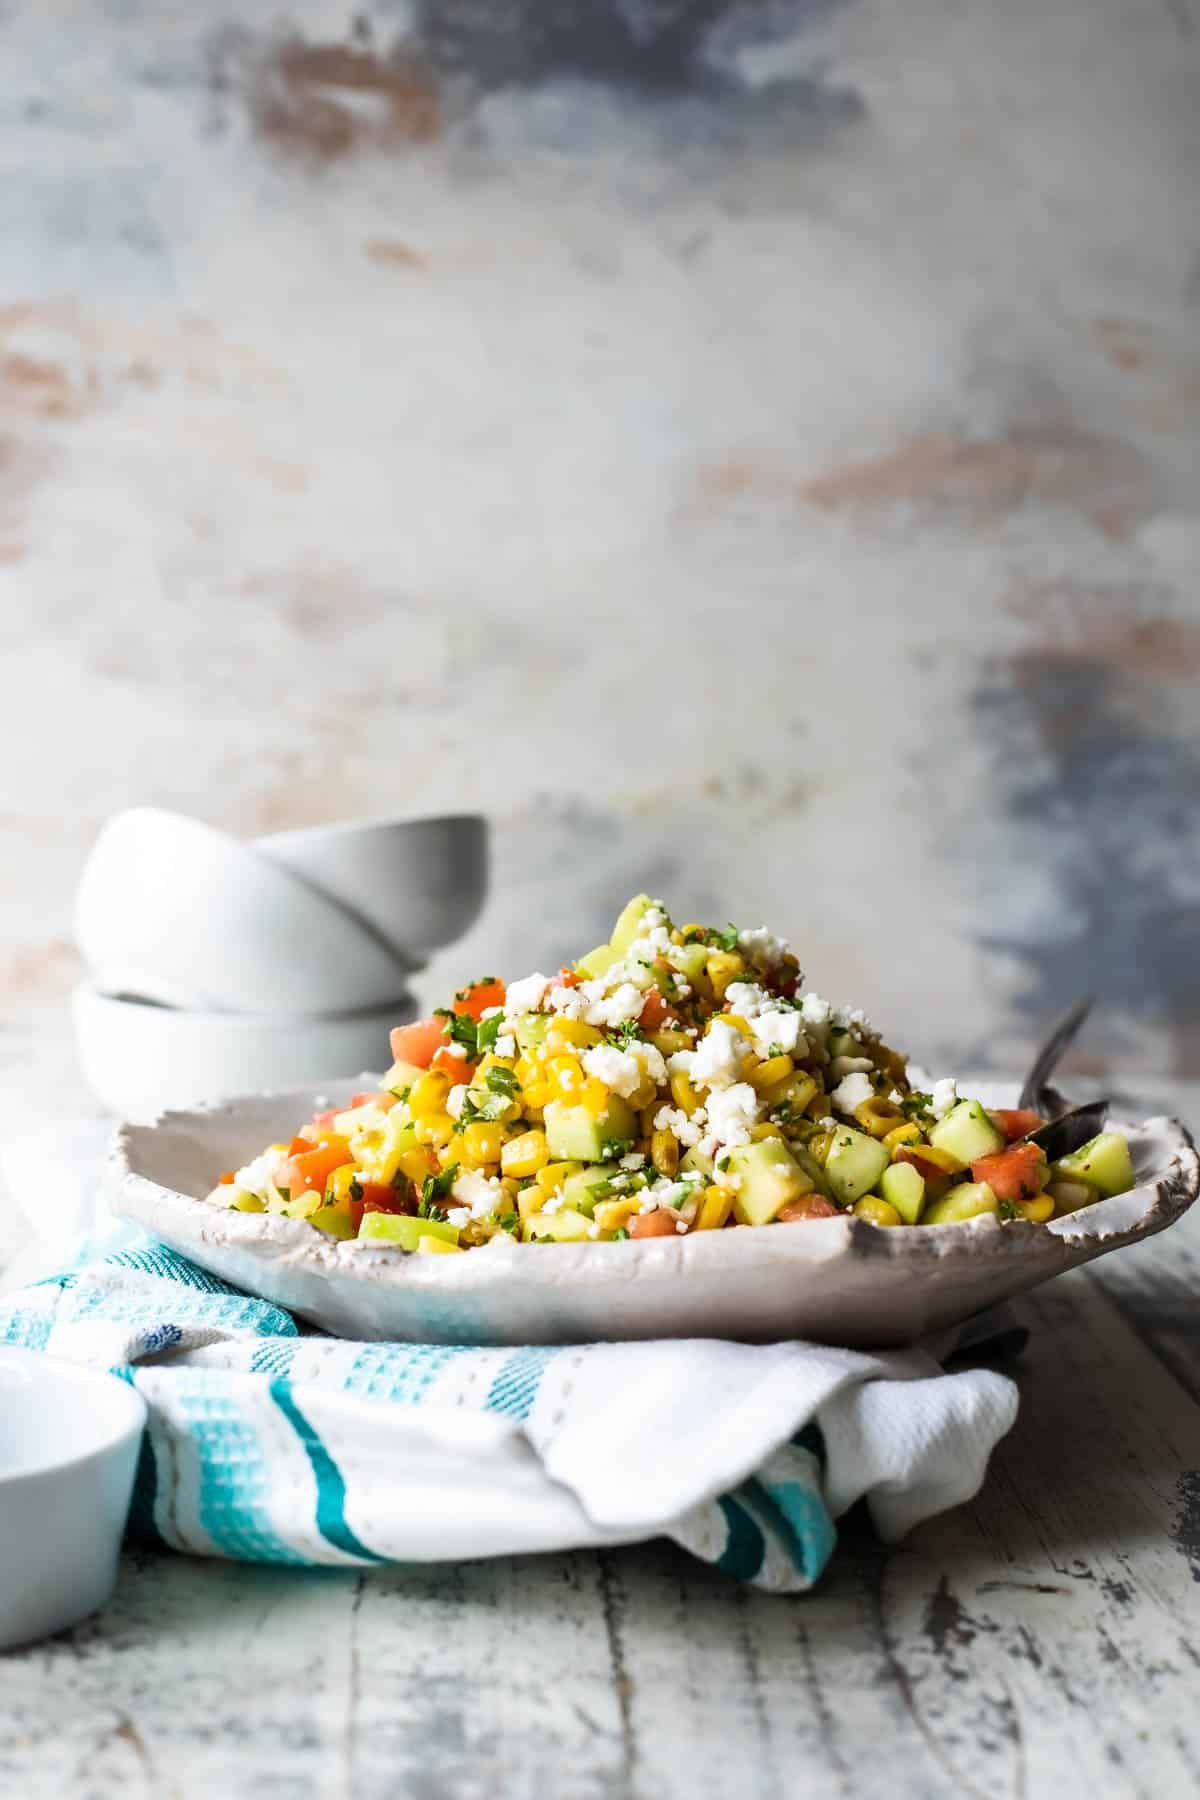 A serving platter of Corn Salad on a blue and white napkin.